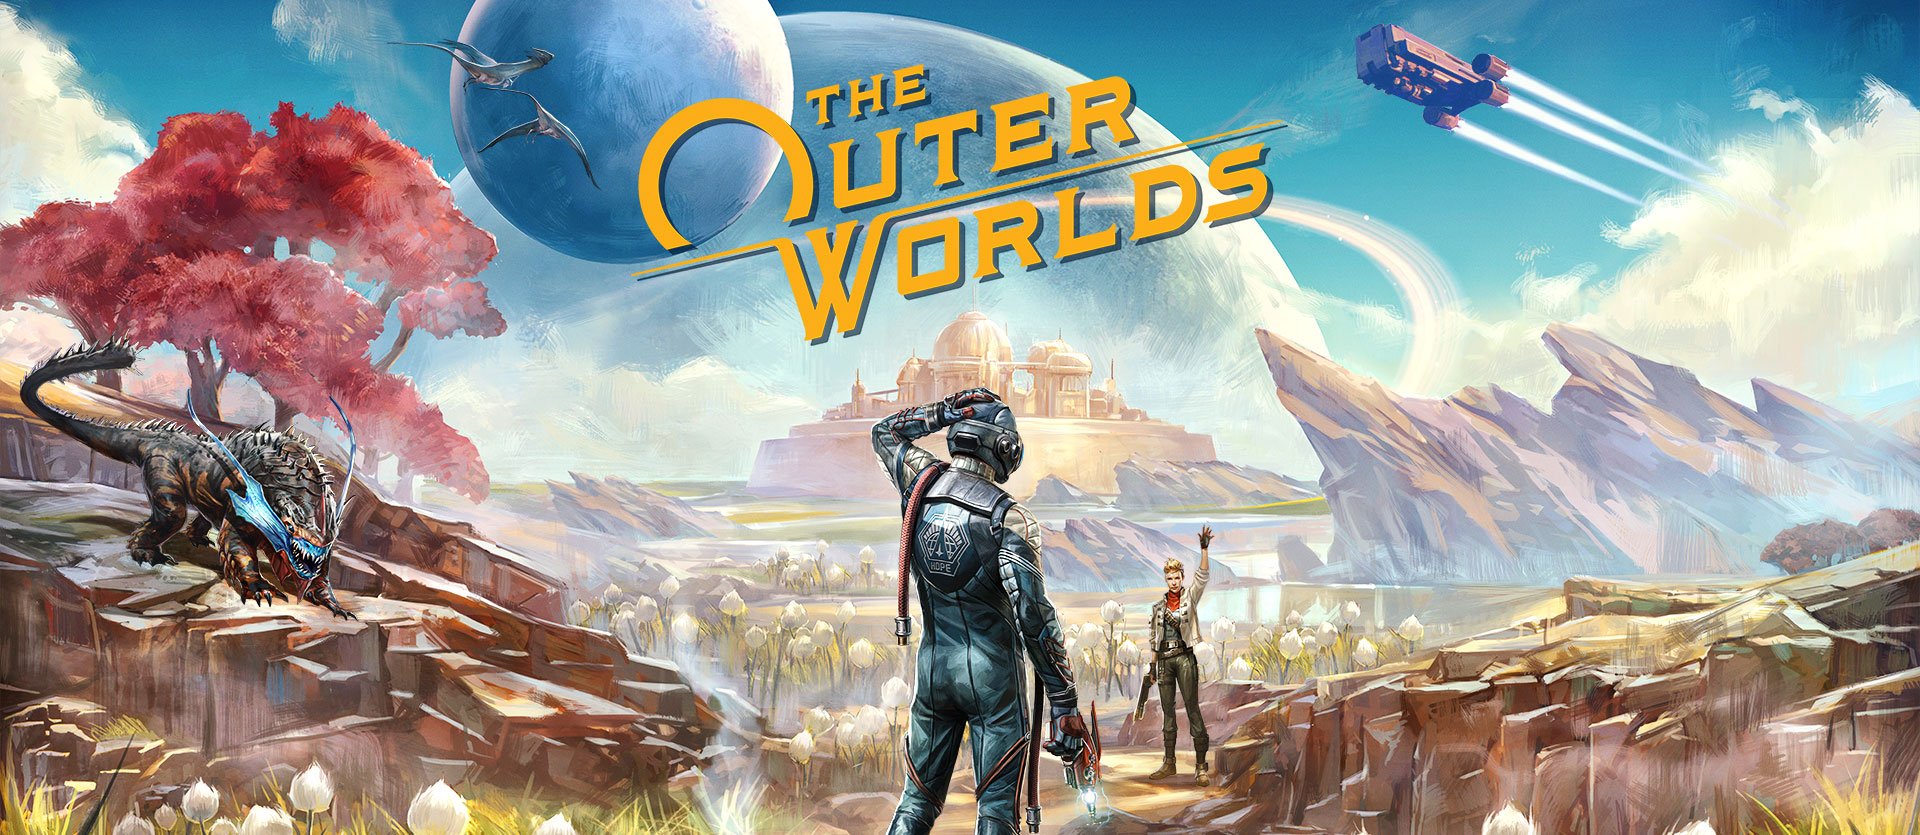 The Outer Worlds’ First DLC Pack, Coming Next Year, Will Bring More Story Content